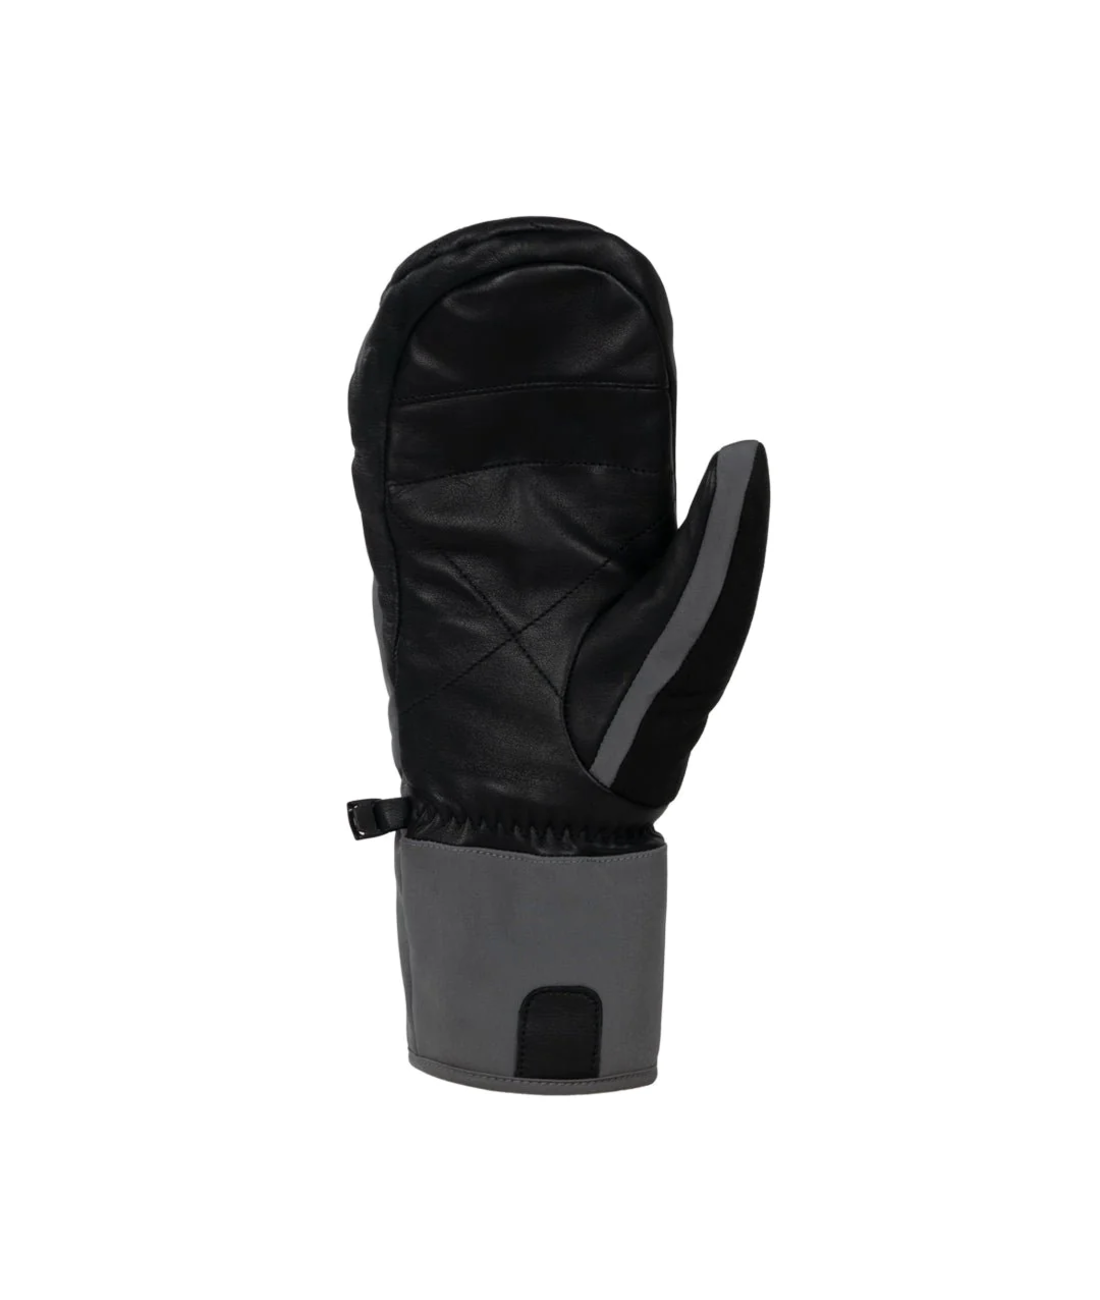 Swaffham - Waterproof Extreme cold weather insulated finger-mitten with Fusion Control